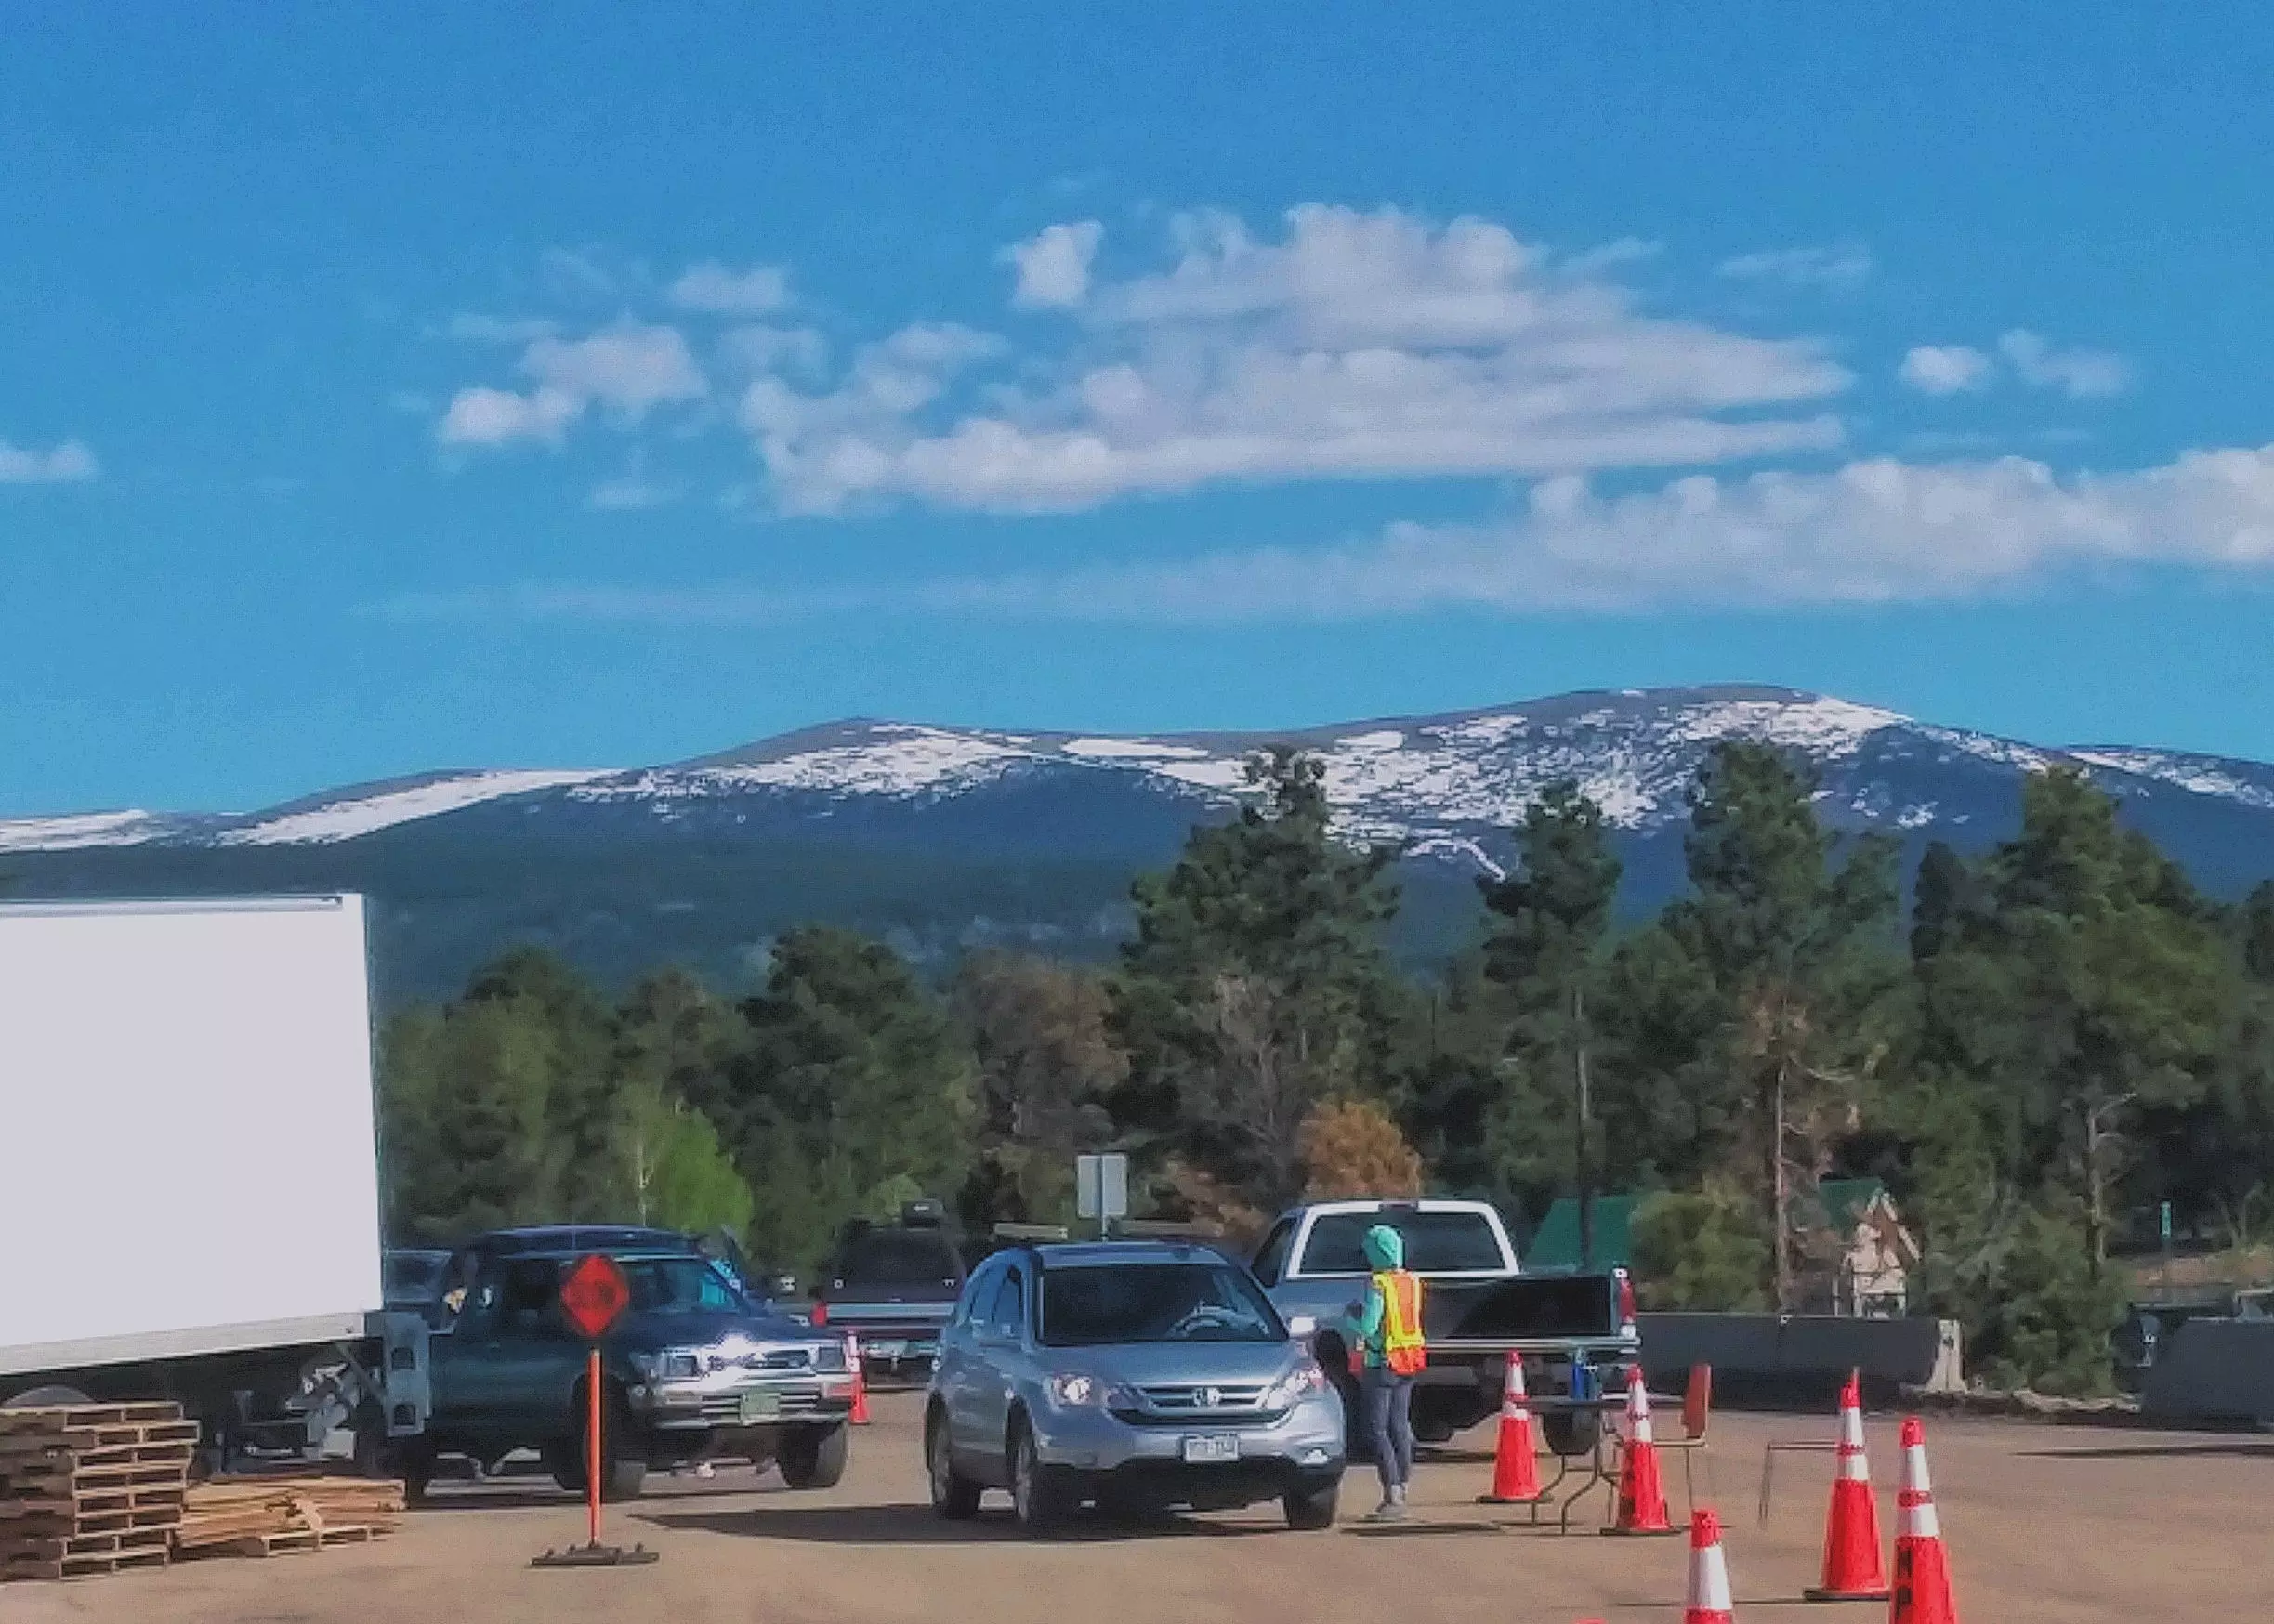 Cars line up outside the Transfer Station. The Indian Peaks can be seen in the background